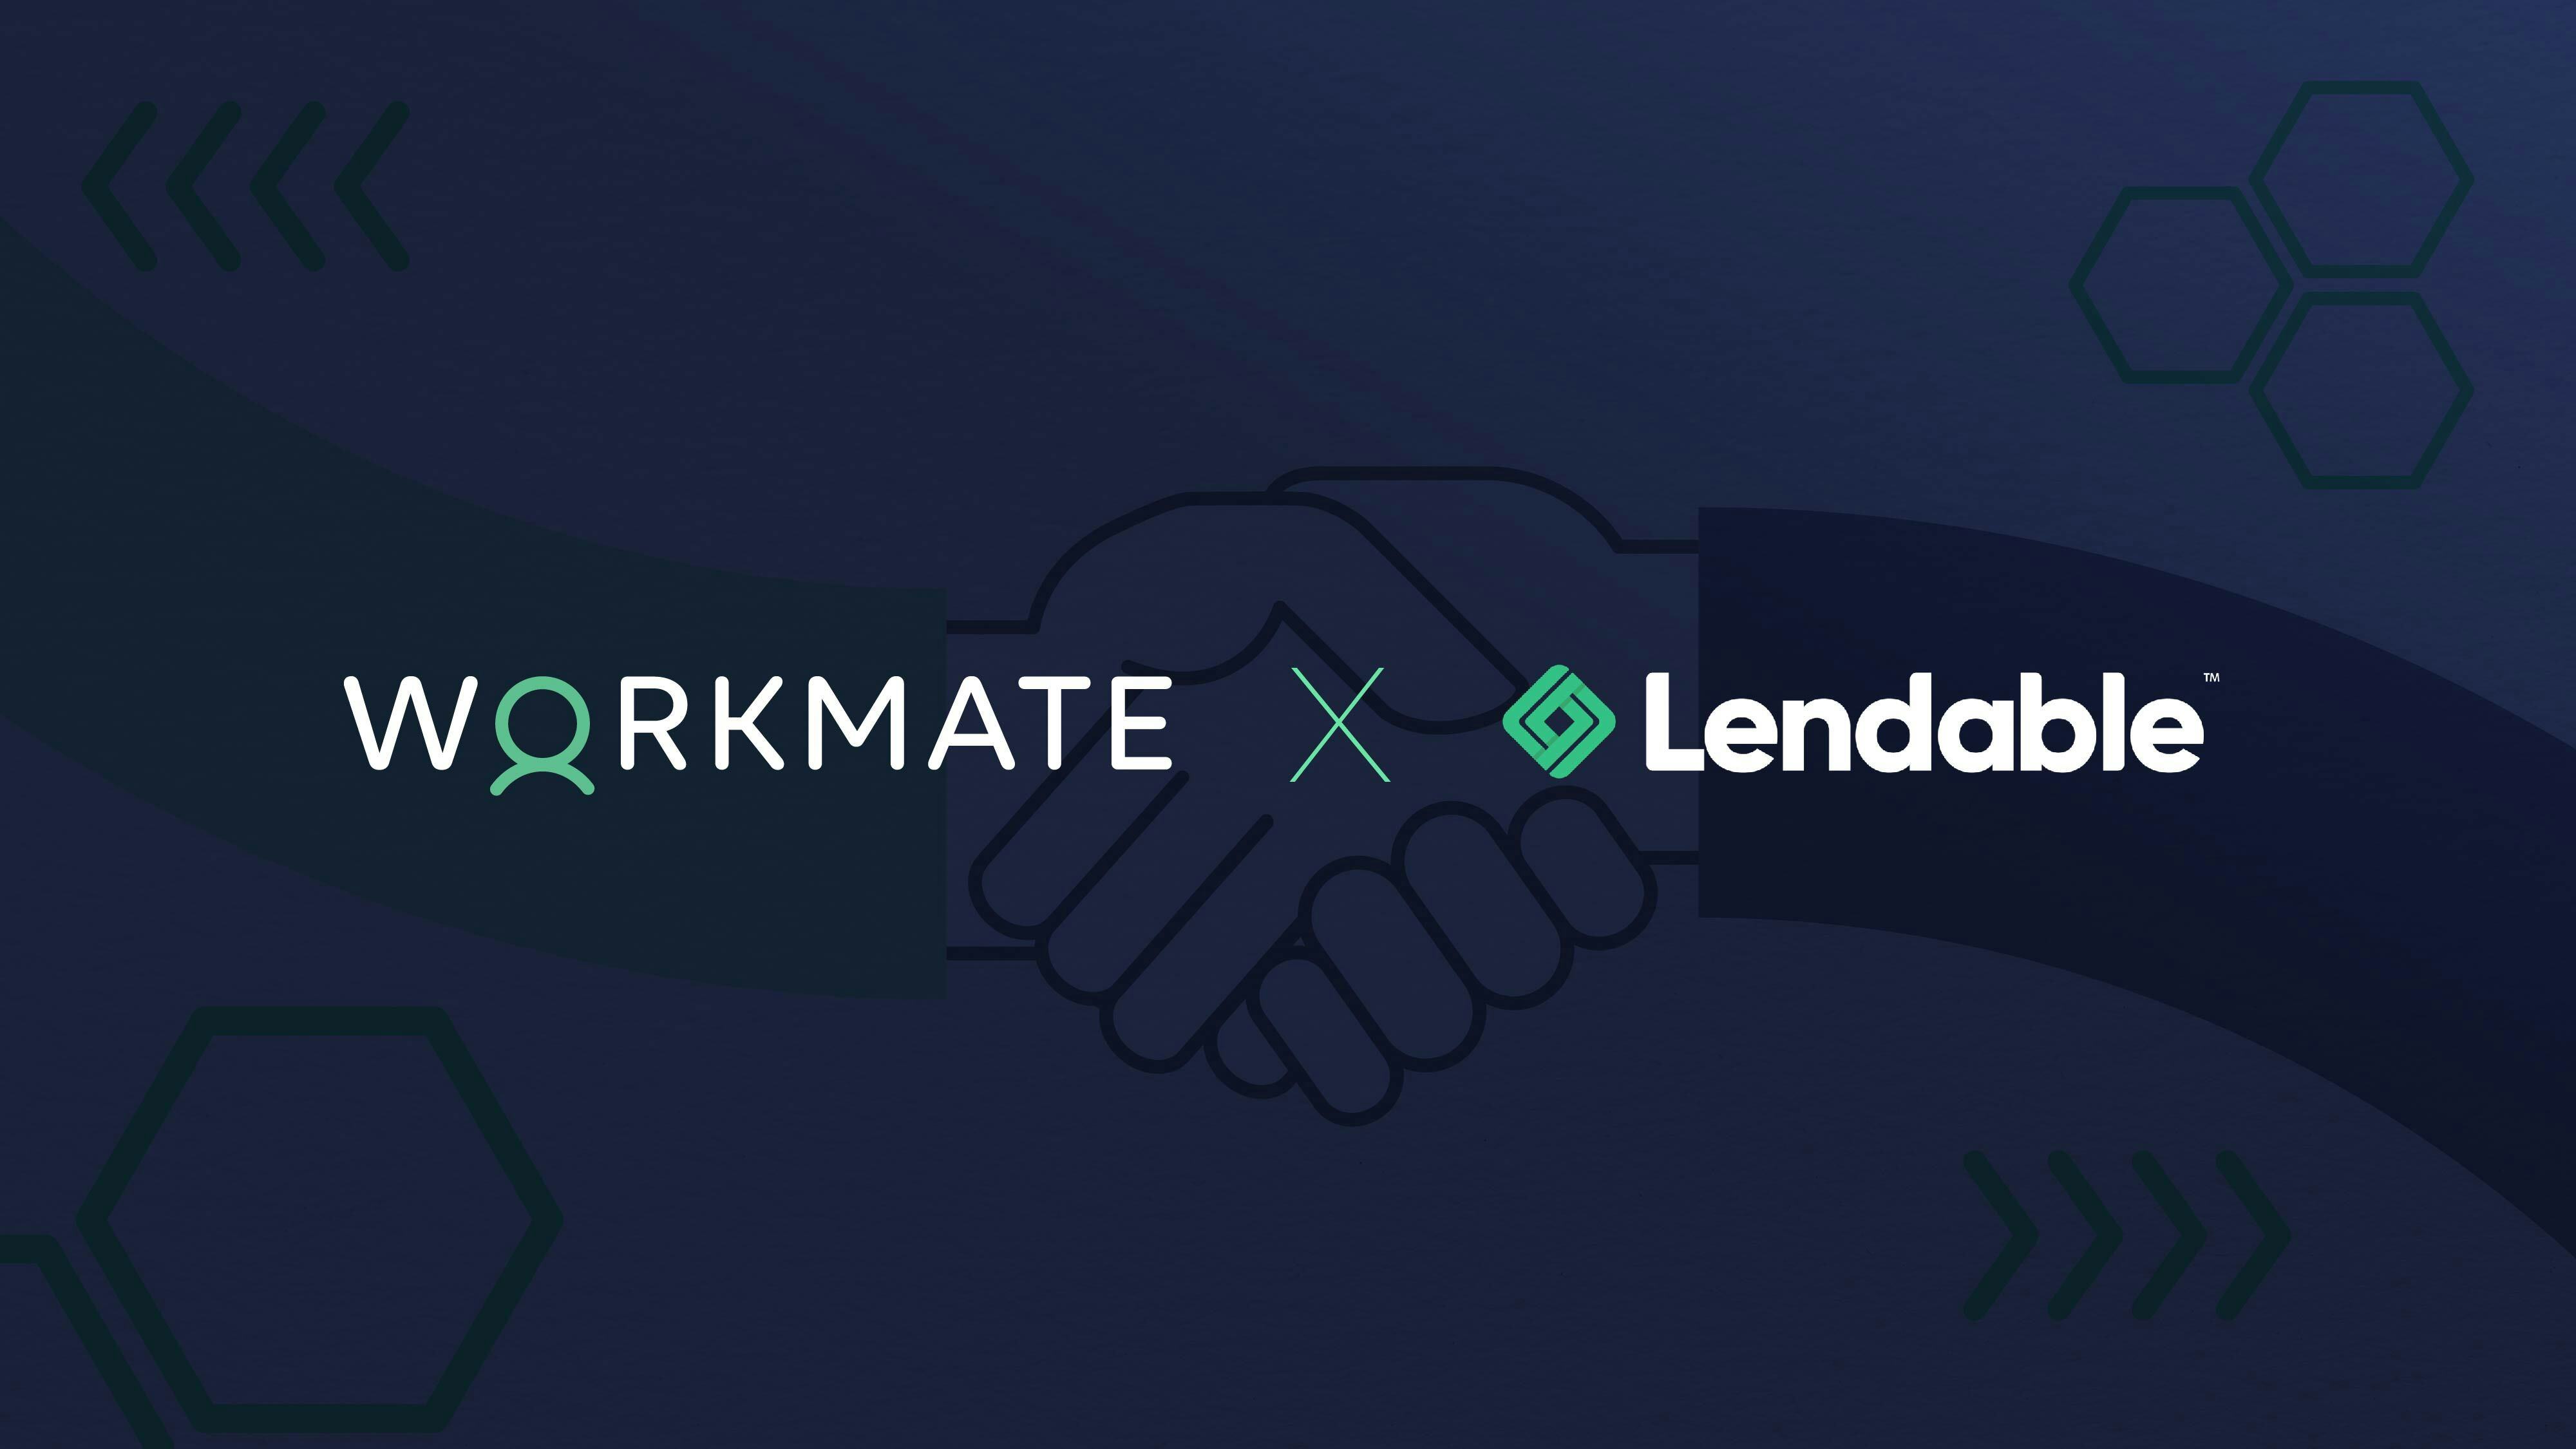 Workmate Secures Debt Financing of up to USD 10 million from Lendable